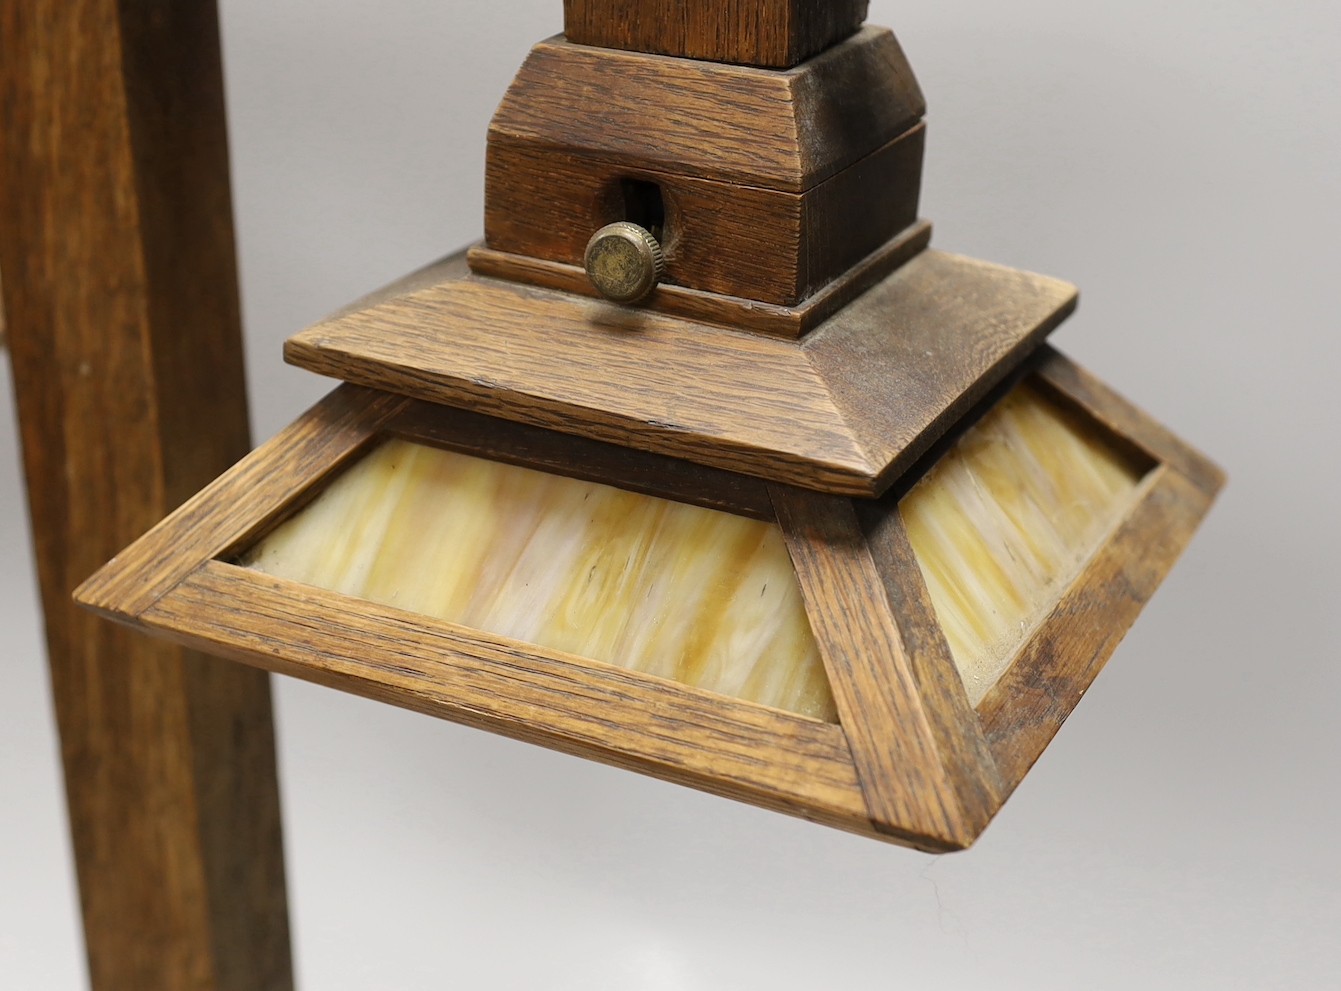 An oak mission-style lamp, 23cms high x 46cms wide